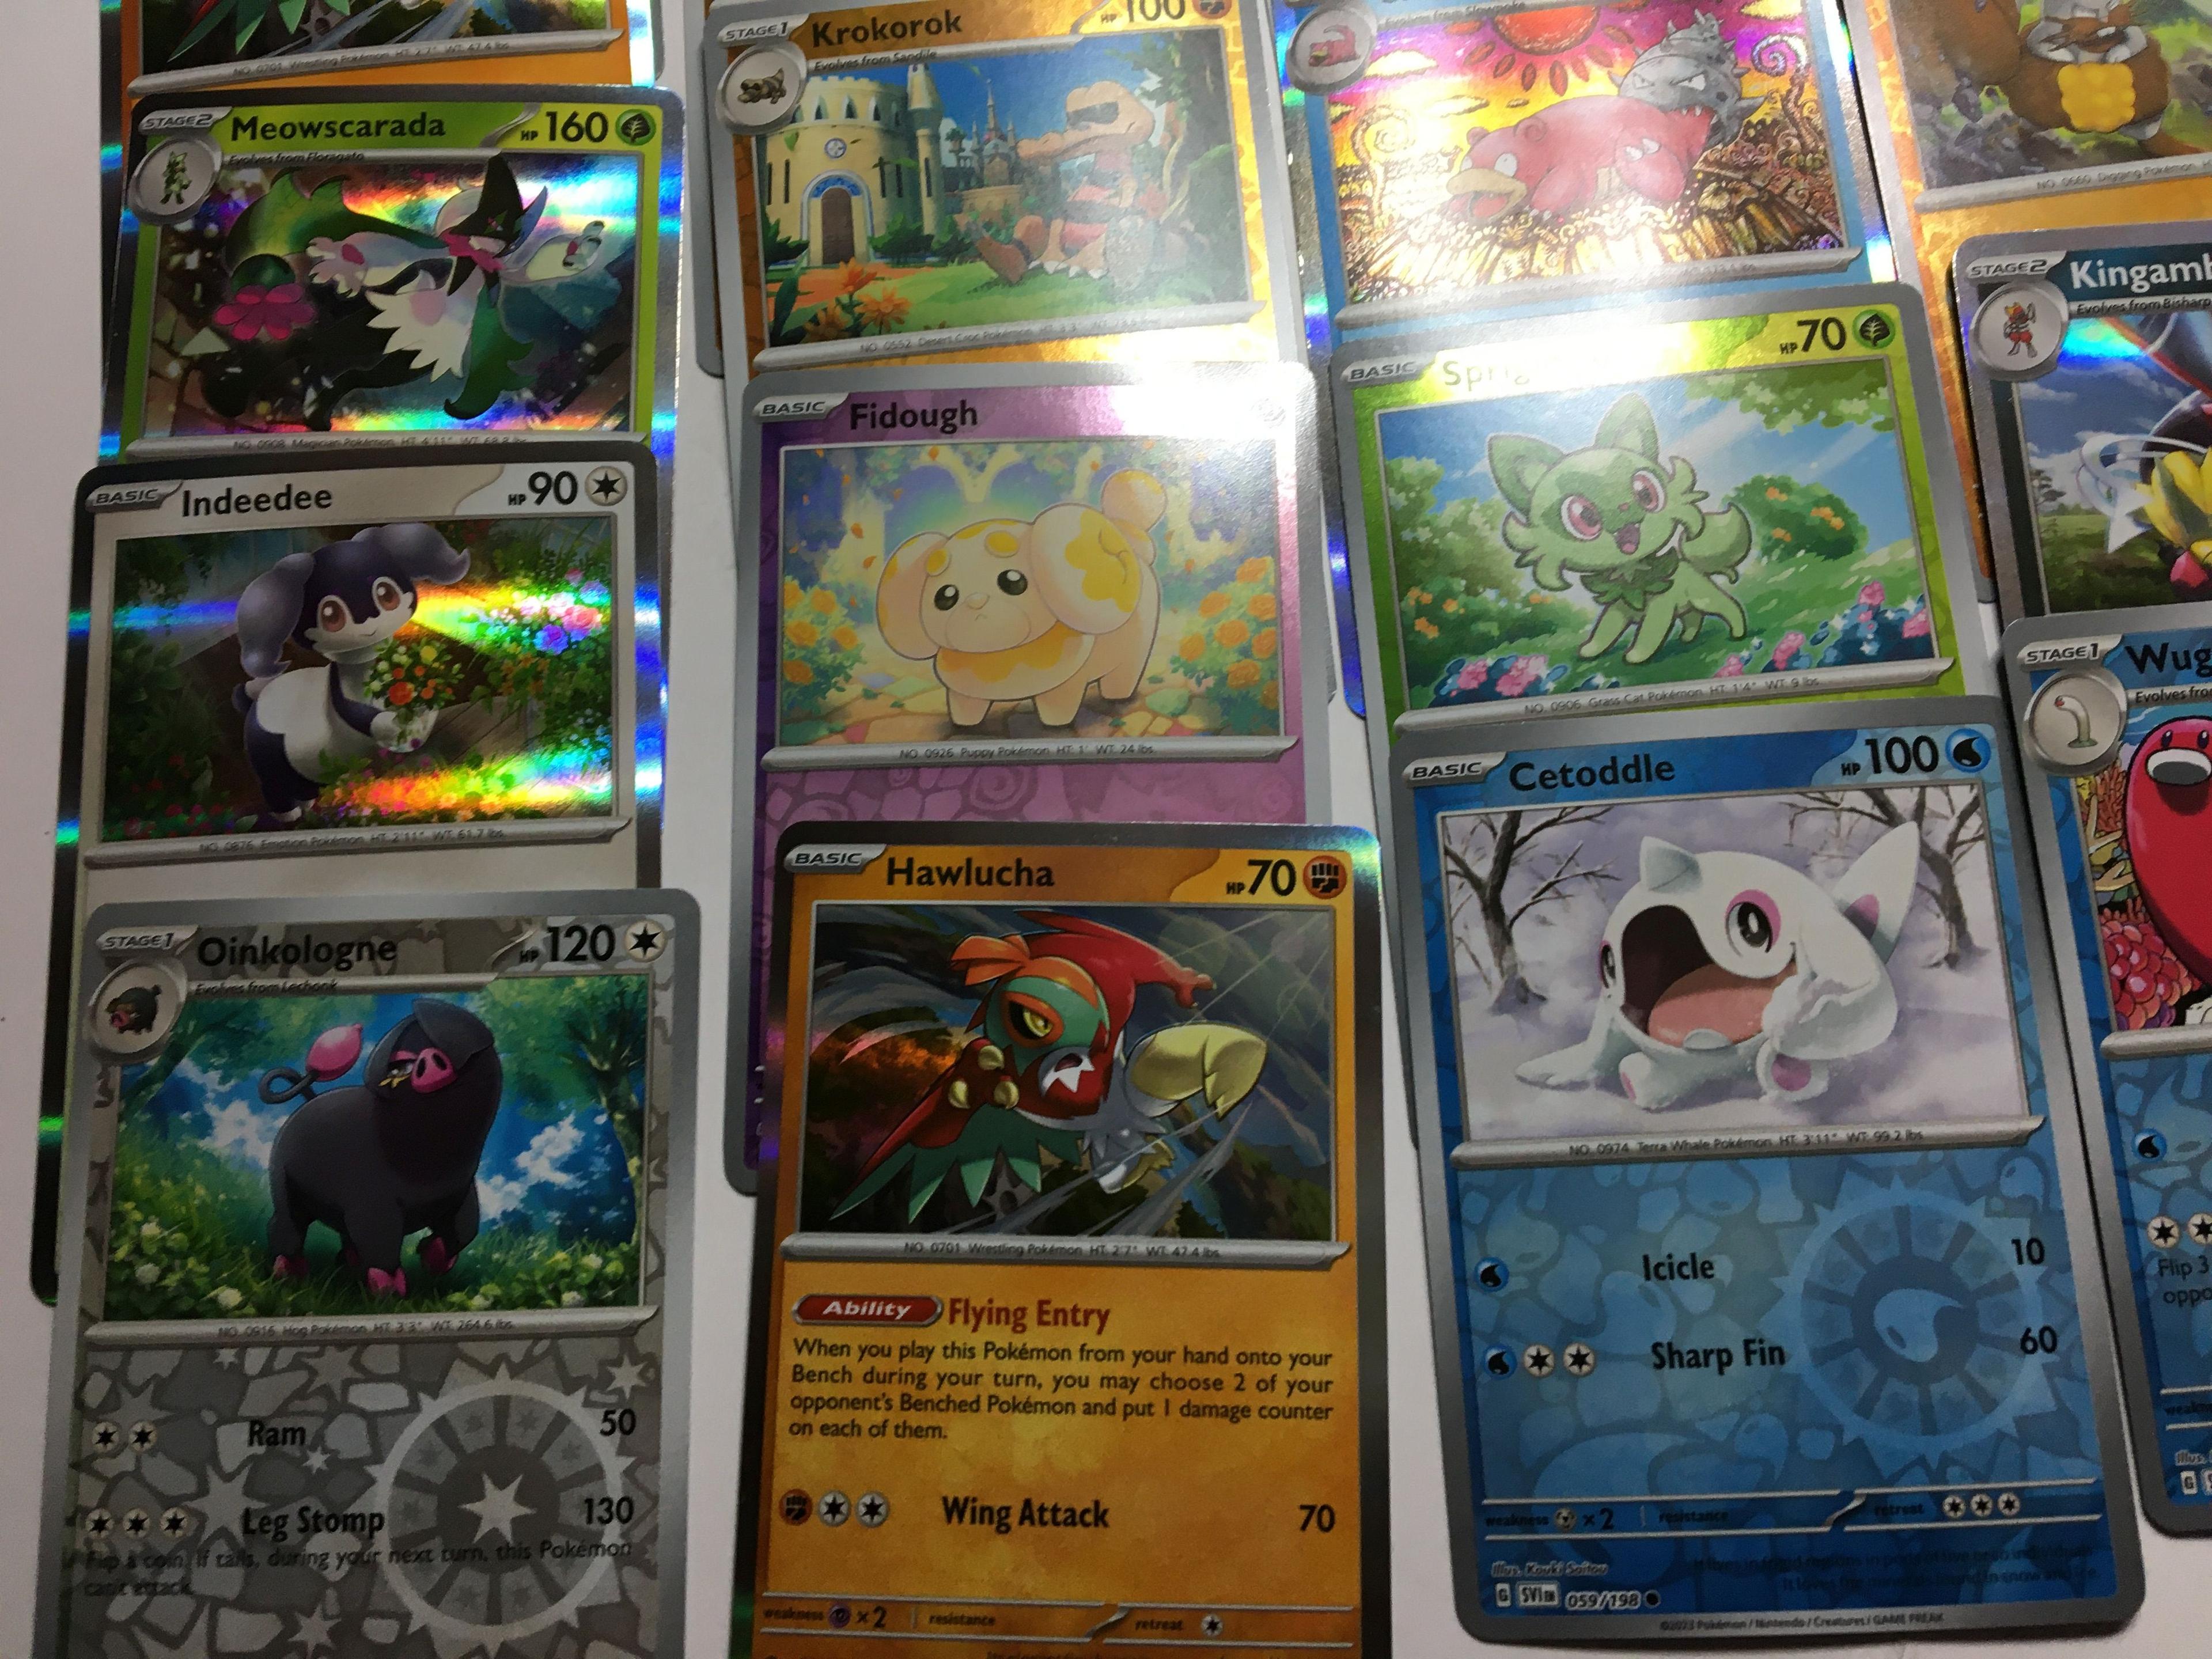 Pokemon Card Huge Lot 32 Cards All Holos Mint Pack Fresh Lots Of Rarers